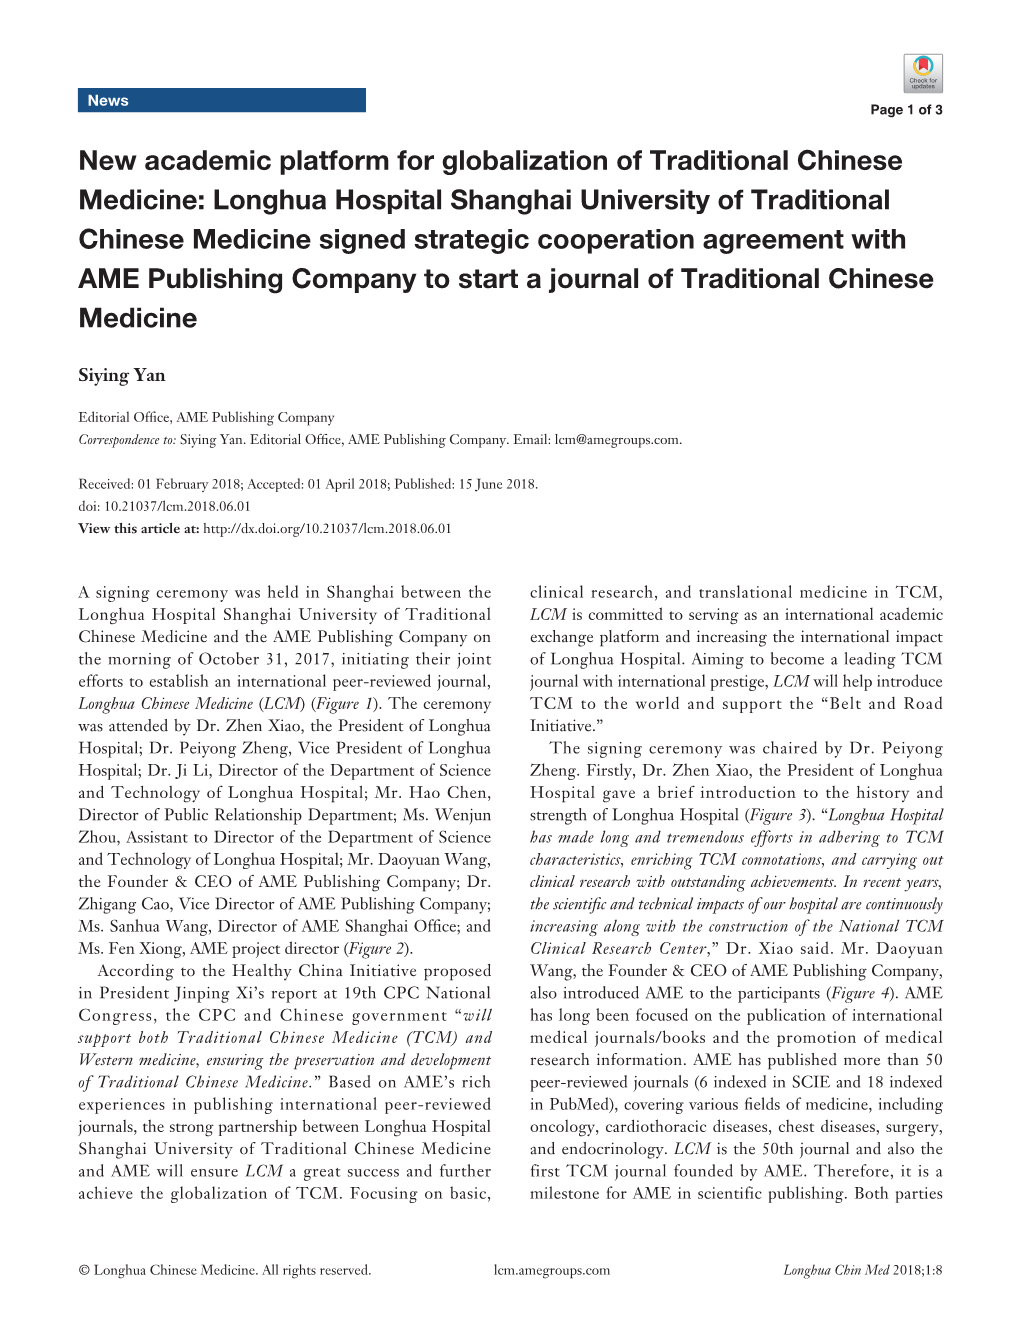 New Academic Platform for Globalization of Traditional Chinese Medicine: Longhua Hospital Shanghai University of Traditional